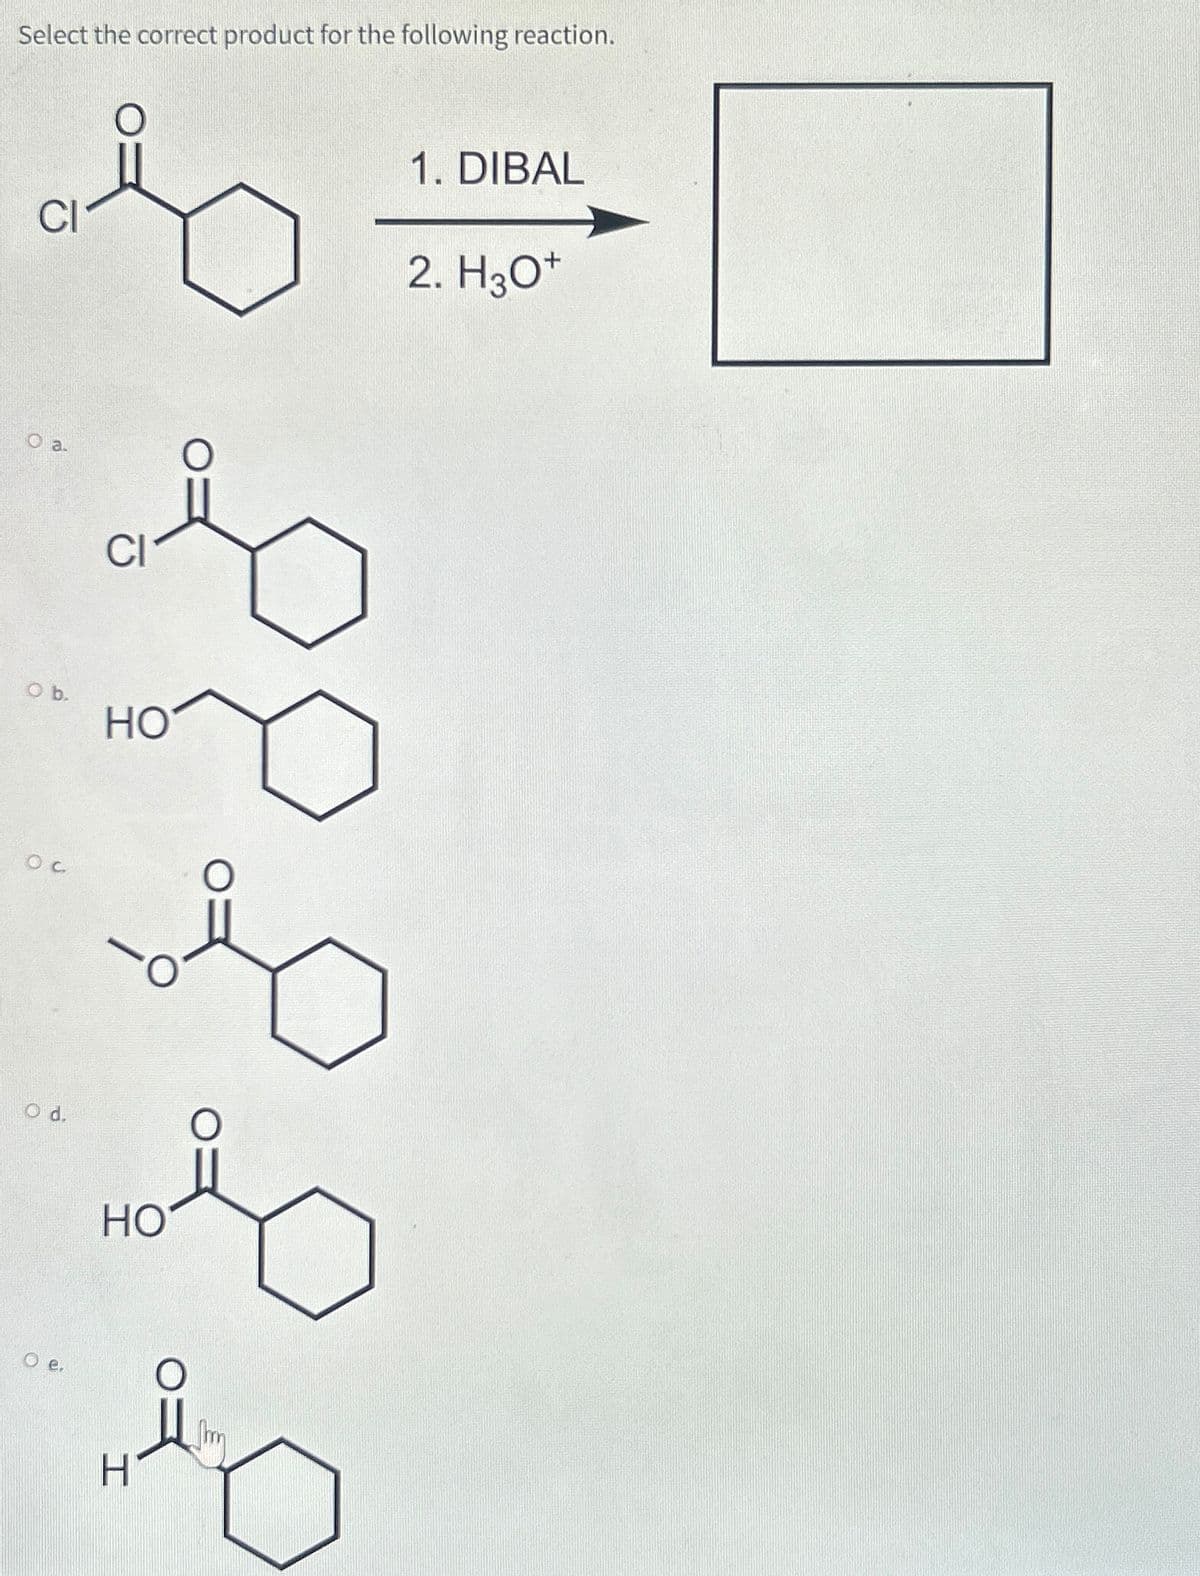 Select the correct product for the following reaction.
CI
O a.
O b.
OC
O d.
Oe.
O
h
CI
HO
HO
H
0=
O
1. DIBAL
2. H3O+